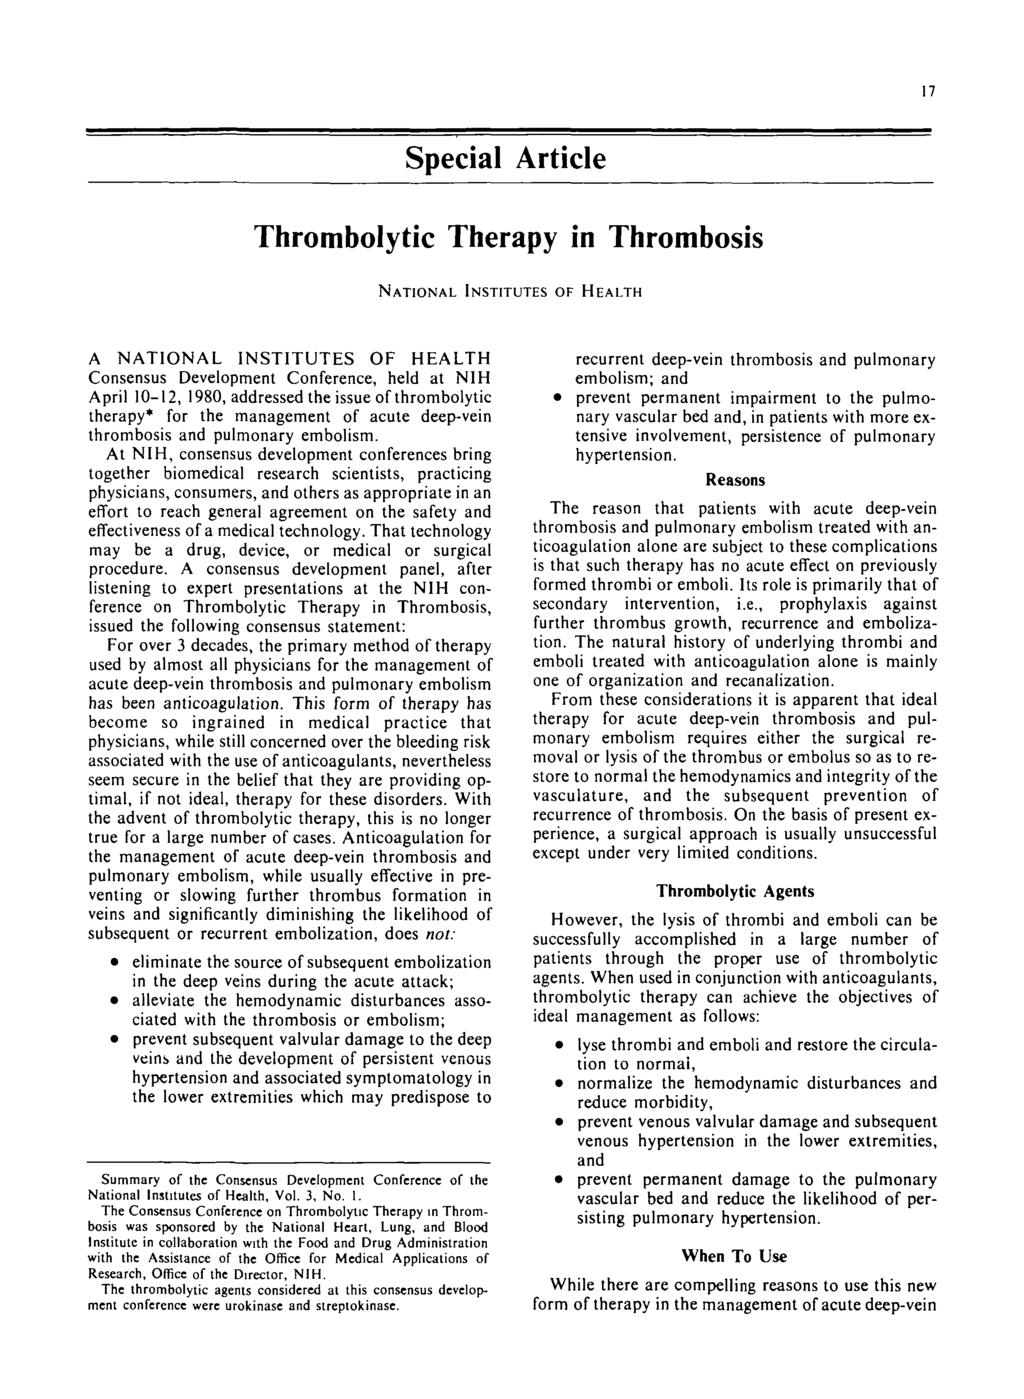 17 Special Article Thrombolytic Therapy in Thrombosis NATIONAL INSTITUTES OF HEALTH A NATIONAL INSTITUTES OF HEALTH Consensus Development Conference, held at NIH April 10-12, 1980, addressed the